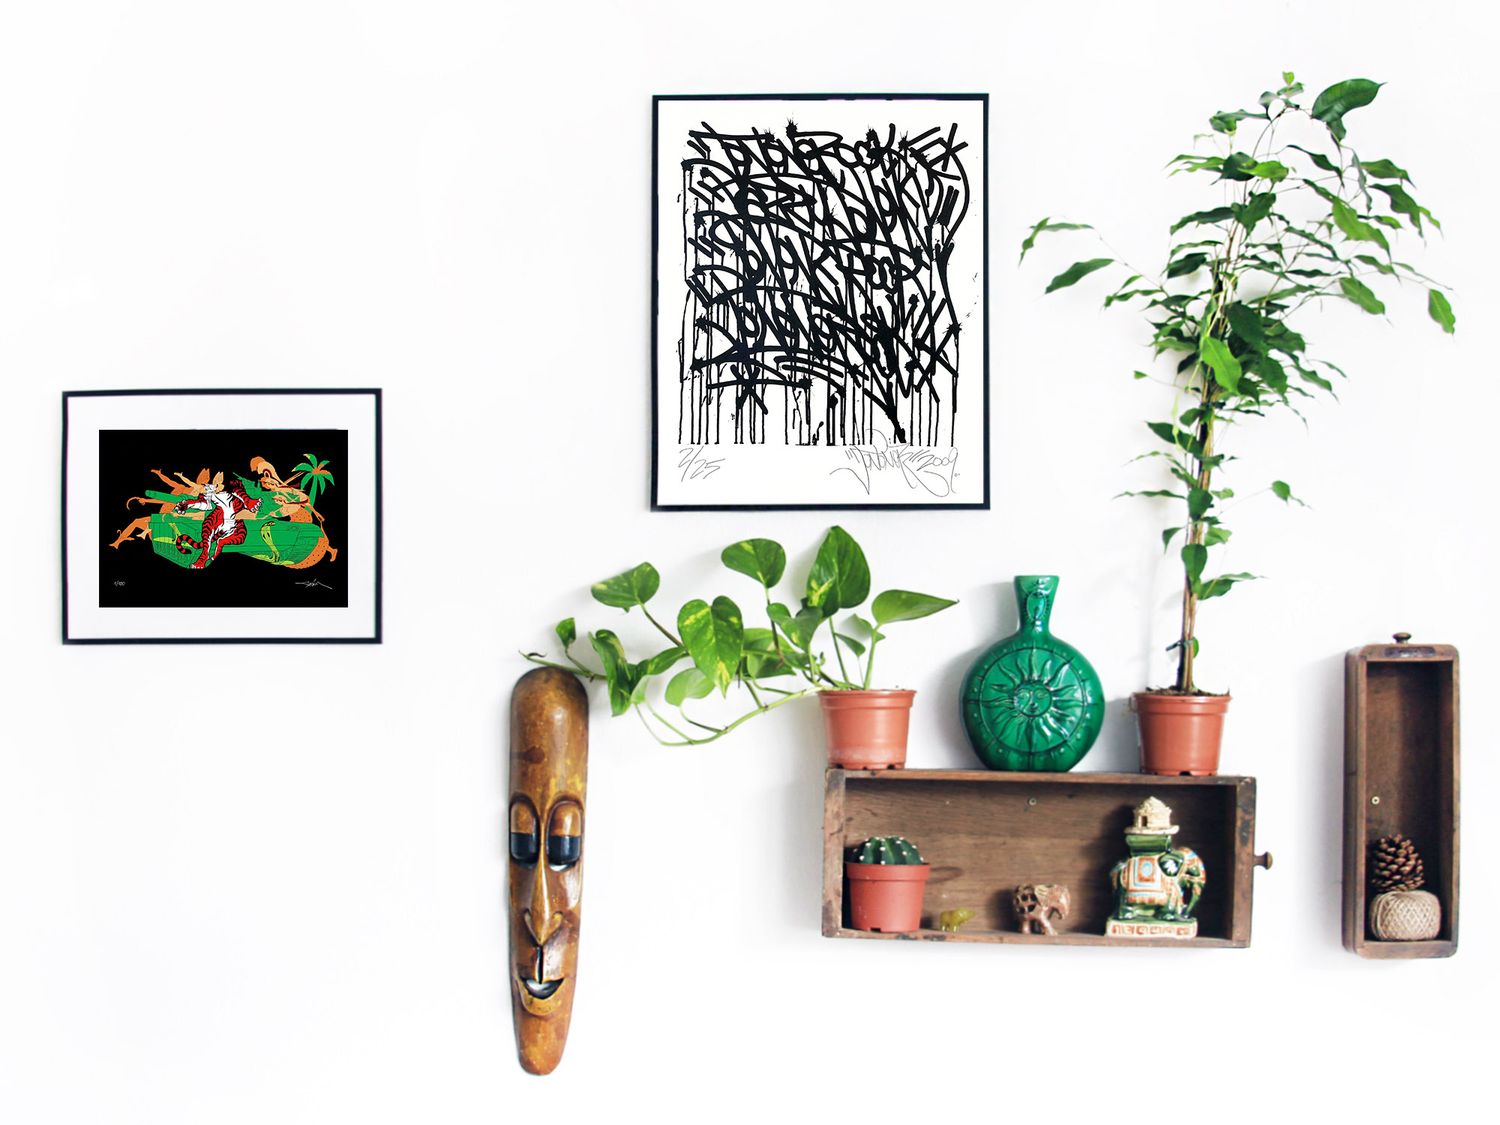 Buying art online is now a common practice, especially for a new generation of collectors who are more willing to buy art online, whether for decorating their home interior or as a profitable investment.